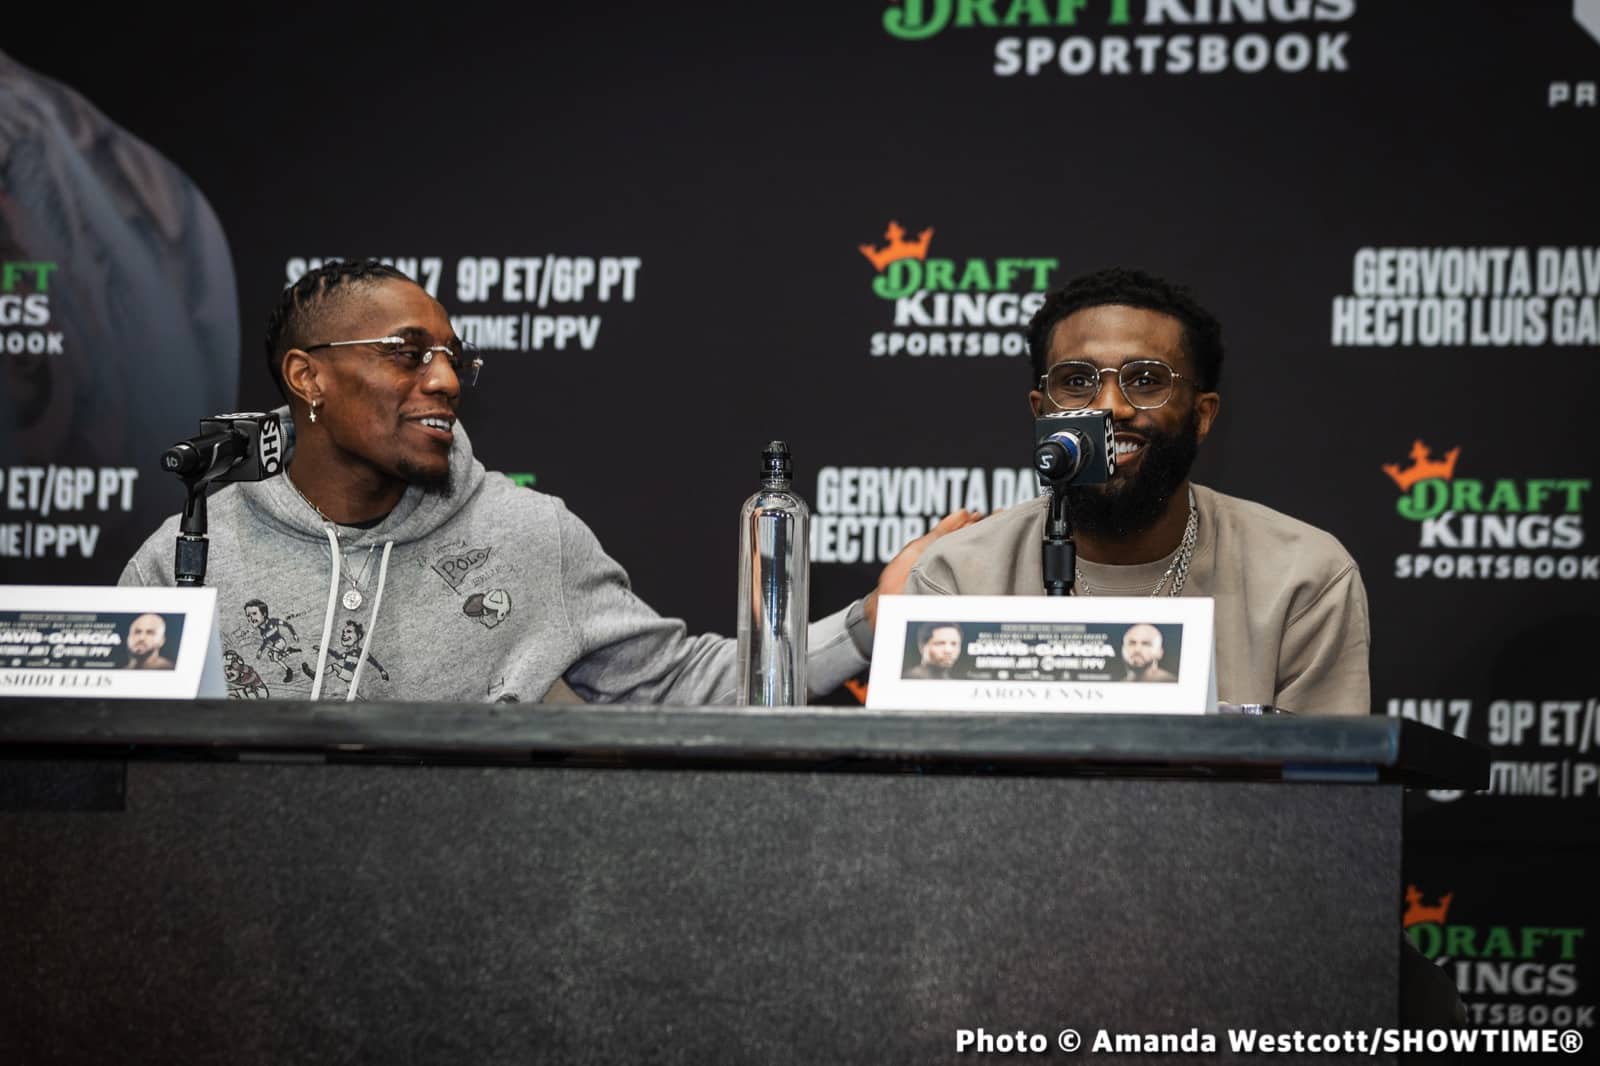 Image: Boots Ennis says Errol Spence has 120 days to fight him after next bout